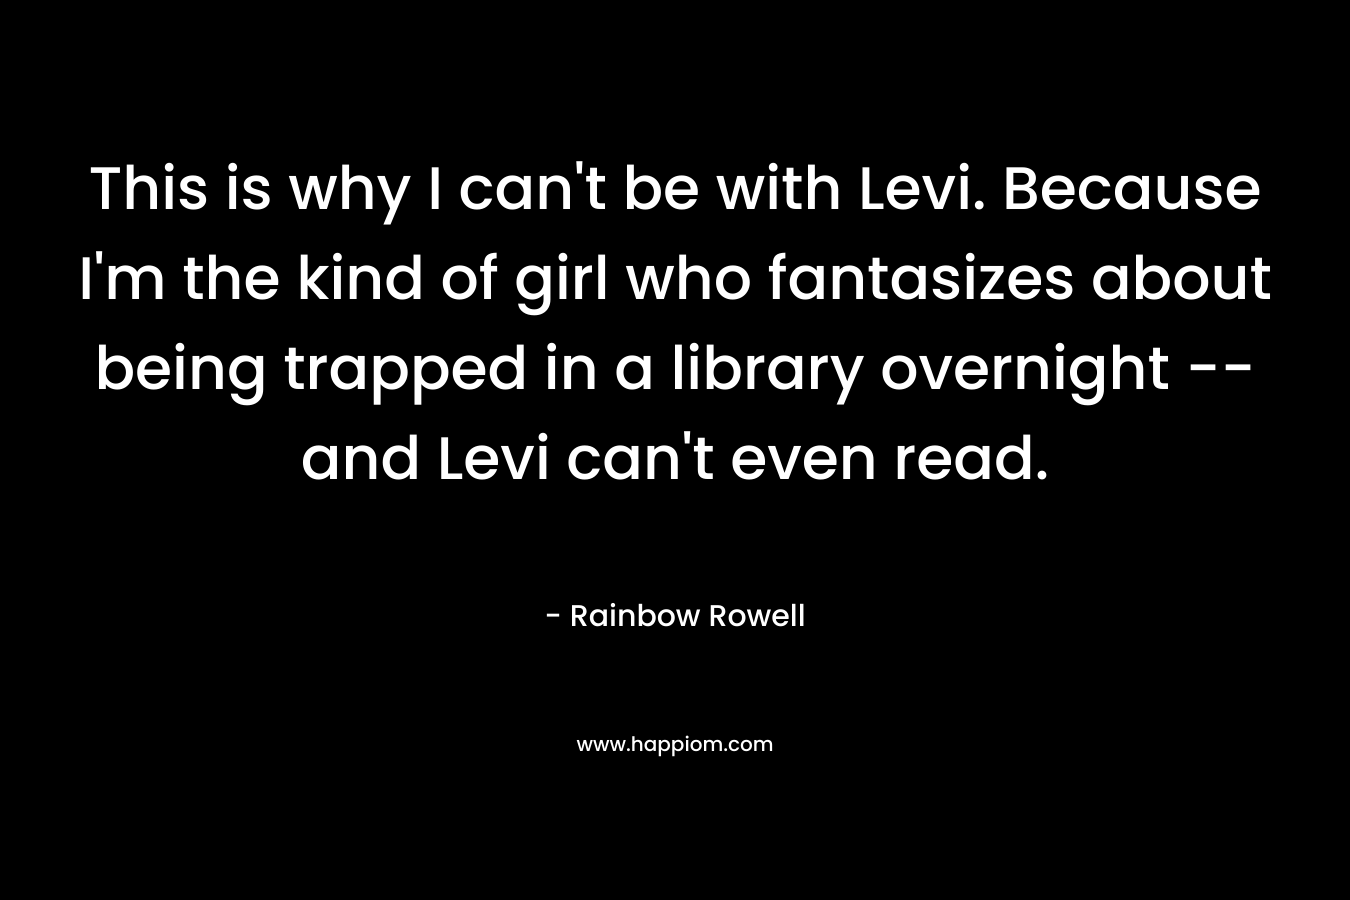 This is why I can’t be with Levi. Because I’m the kind of girl who fantasizes about being trapped in a library overnight — and Levi can’t even read. – Rainbow Rowell